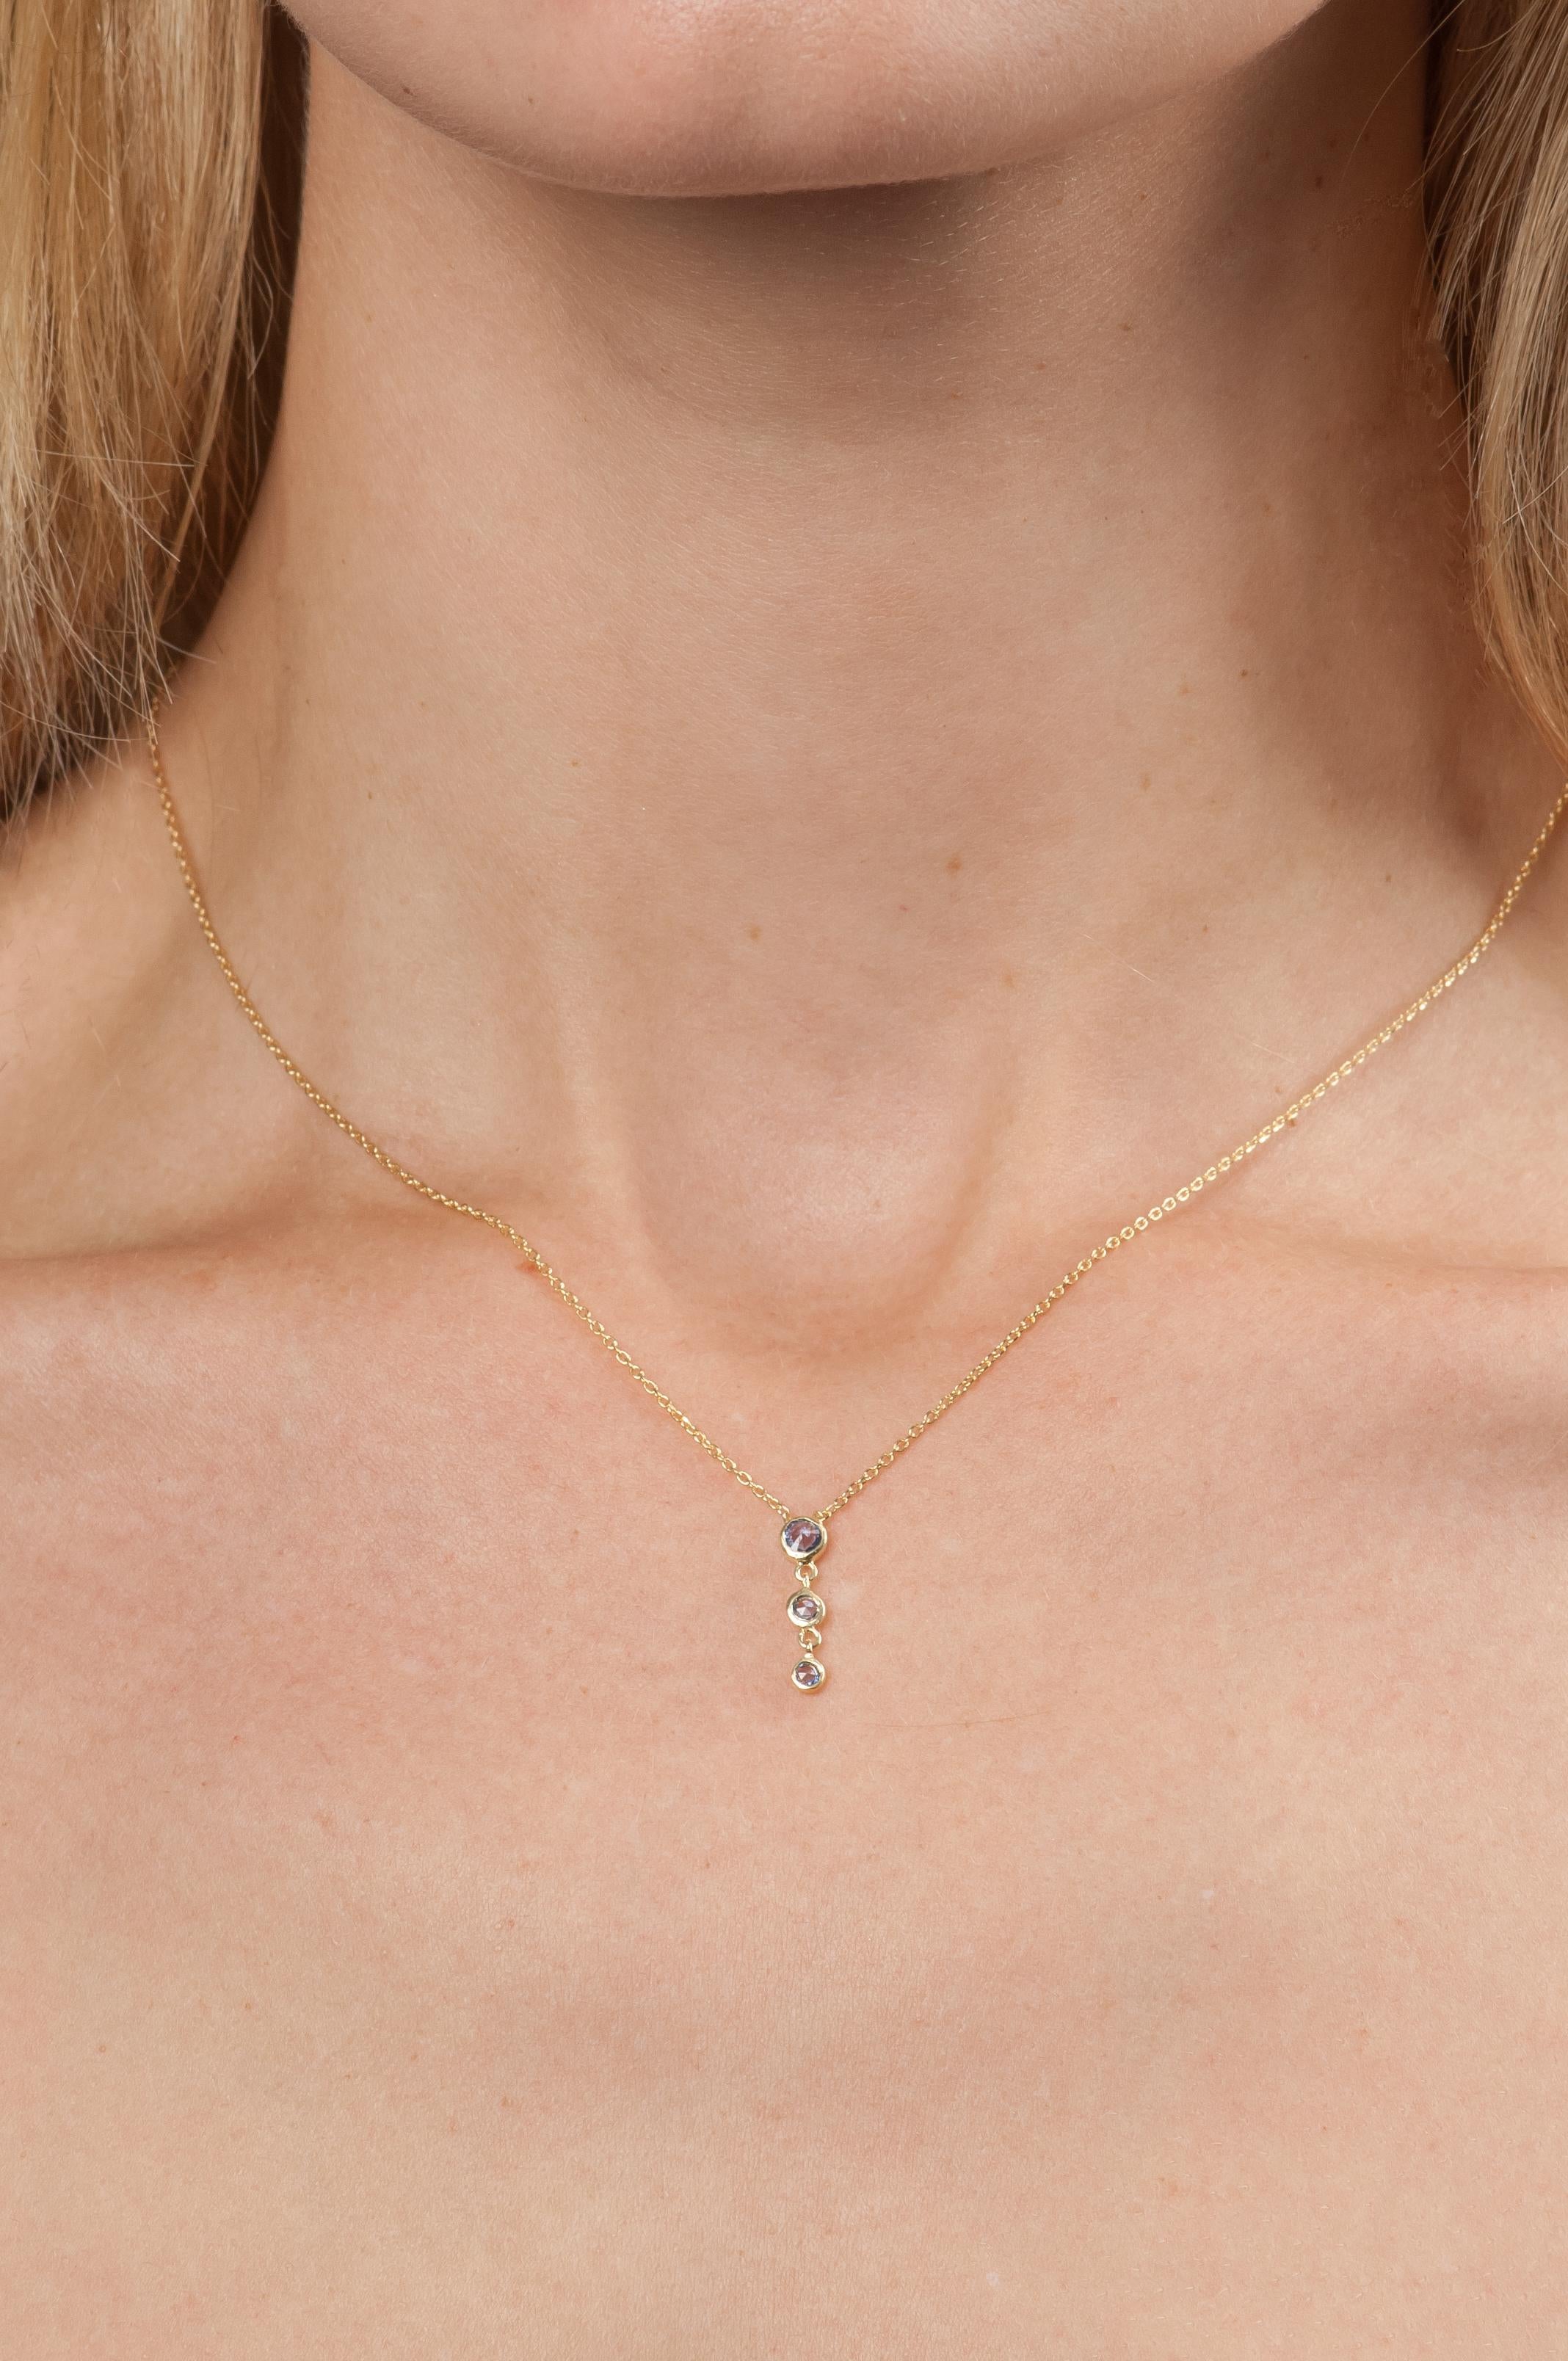 A row of graduated rose cut pink sapphires adds just the right amount of sparkle to this delicate necklace.

18K yellow gold chain with a drop pendant of 3 graduated rose cut pink sapphires (0.25 tcw)
16 inch chain